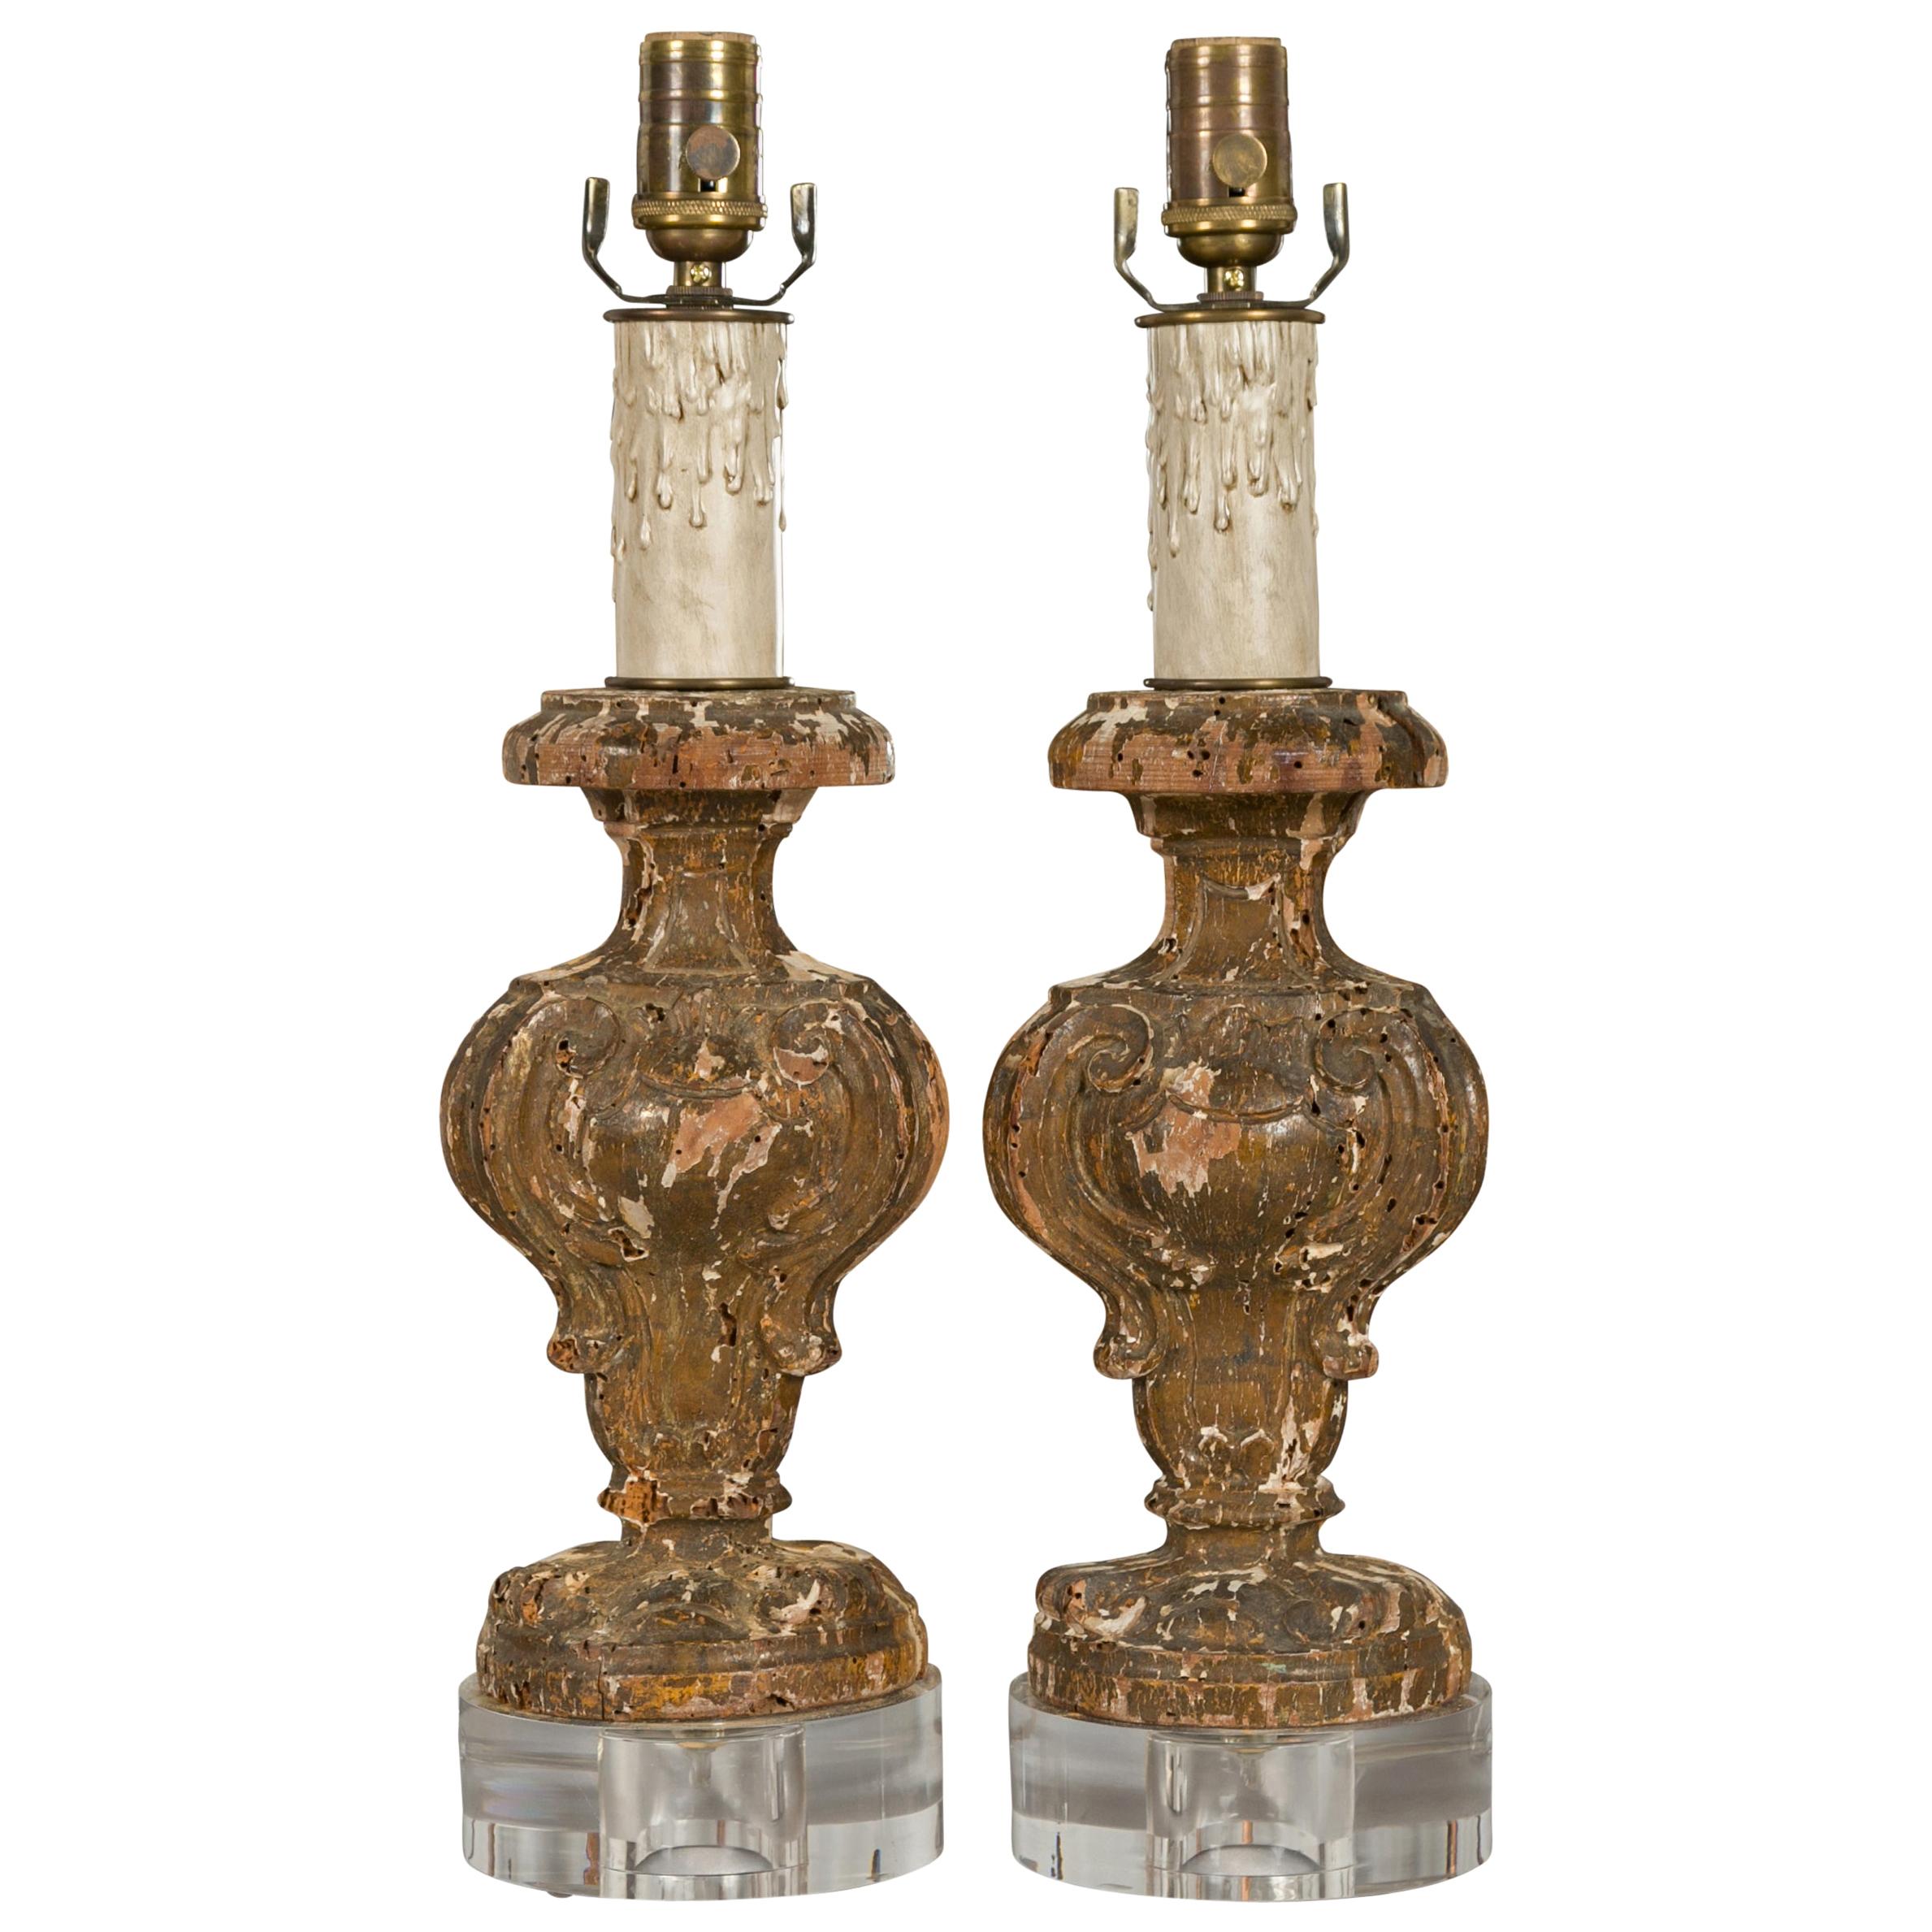 Italian 1820s Baroque Style Carved Fragments Made into Table Lamps on Lucite